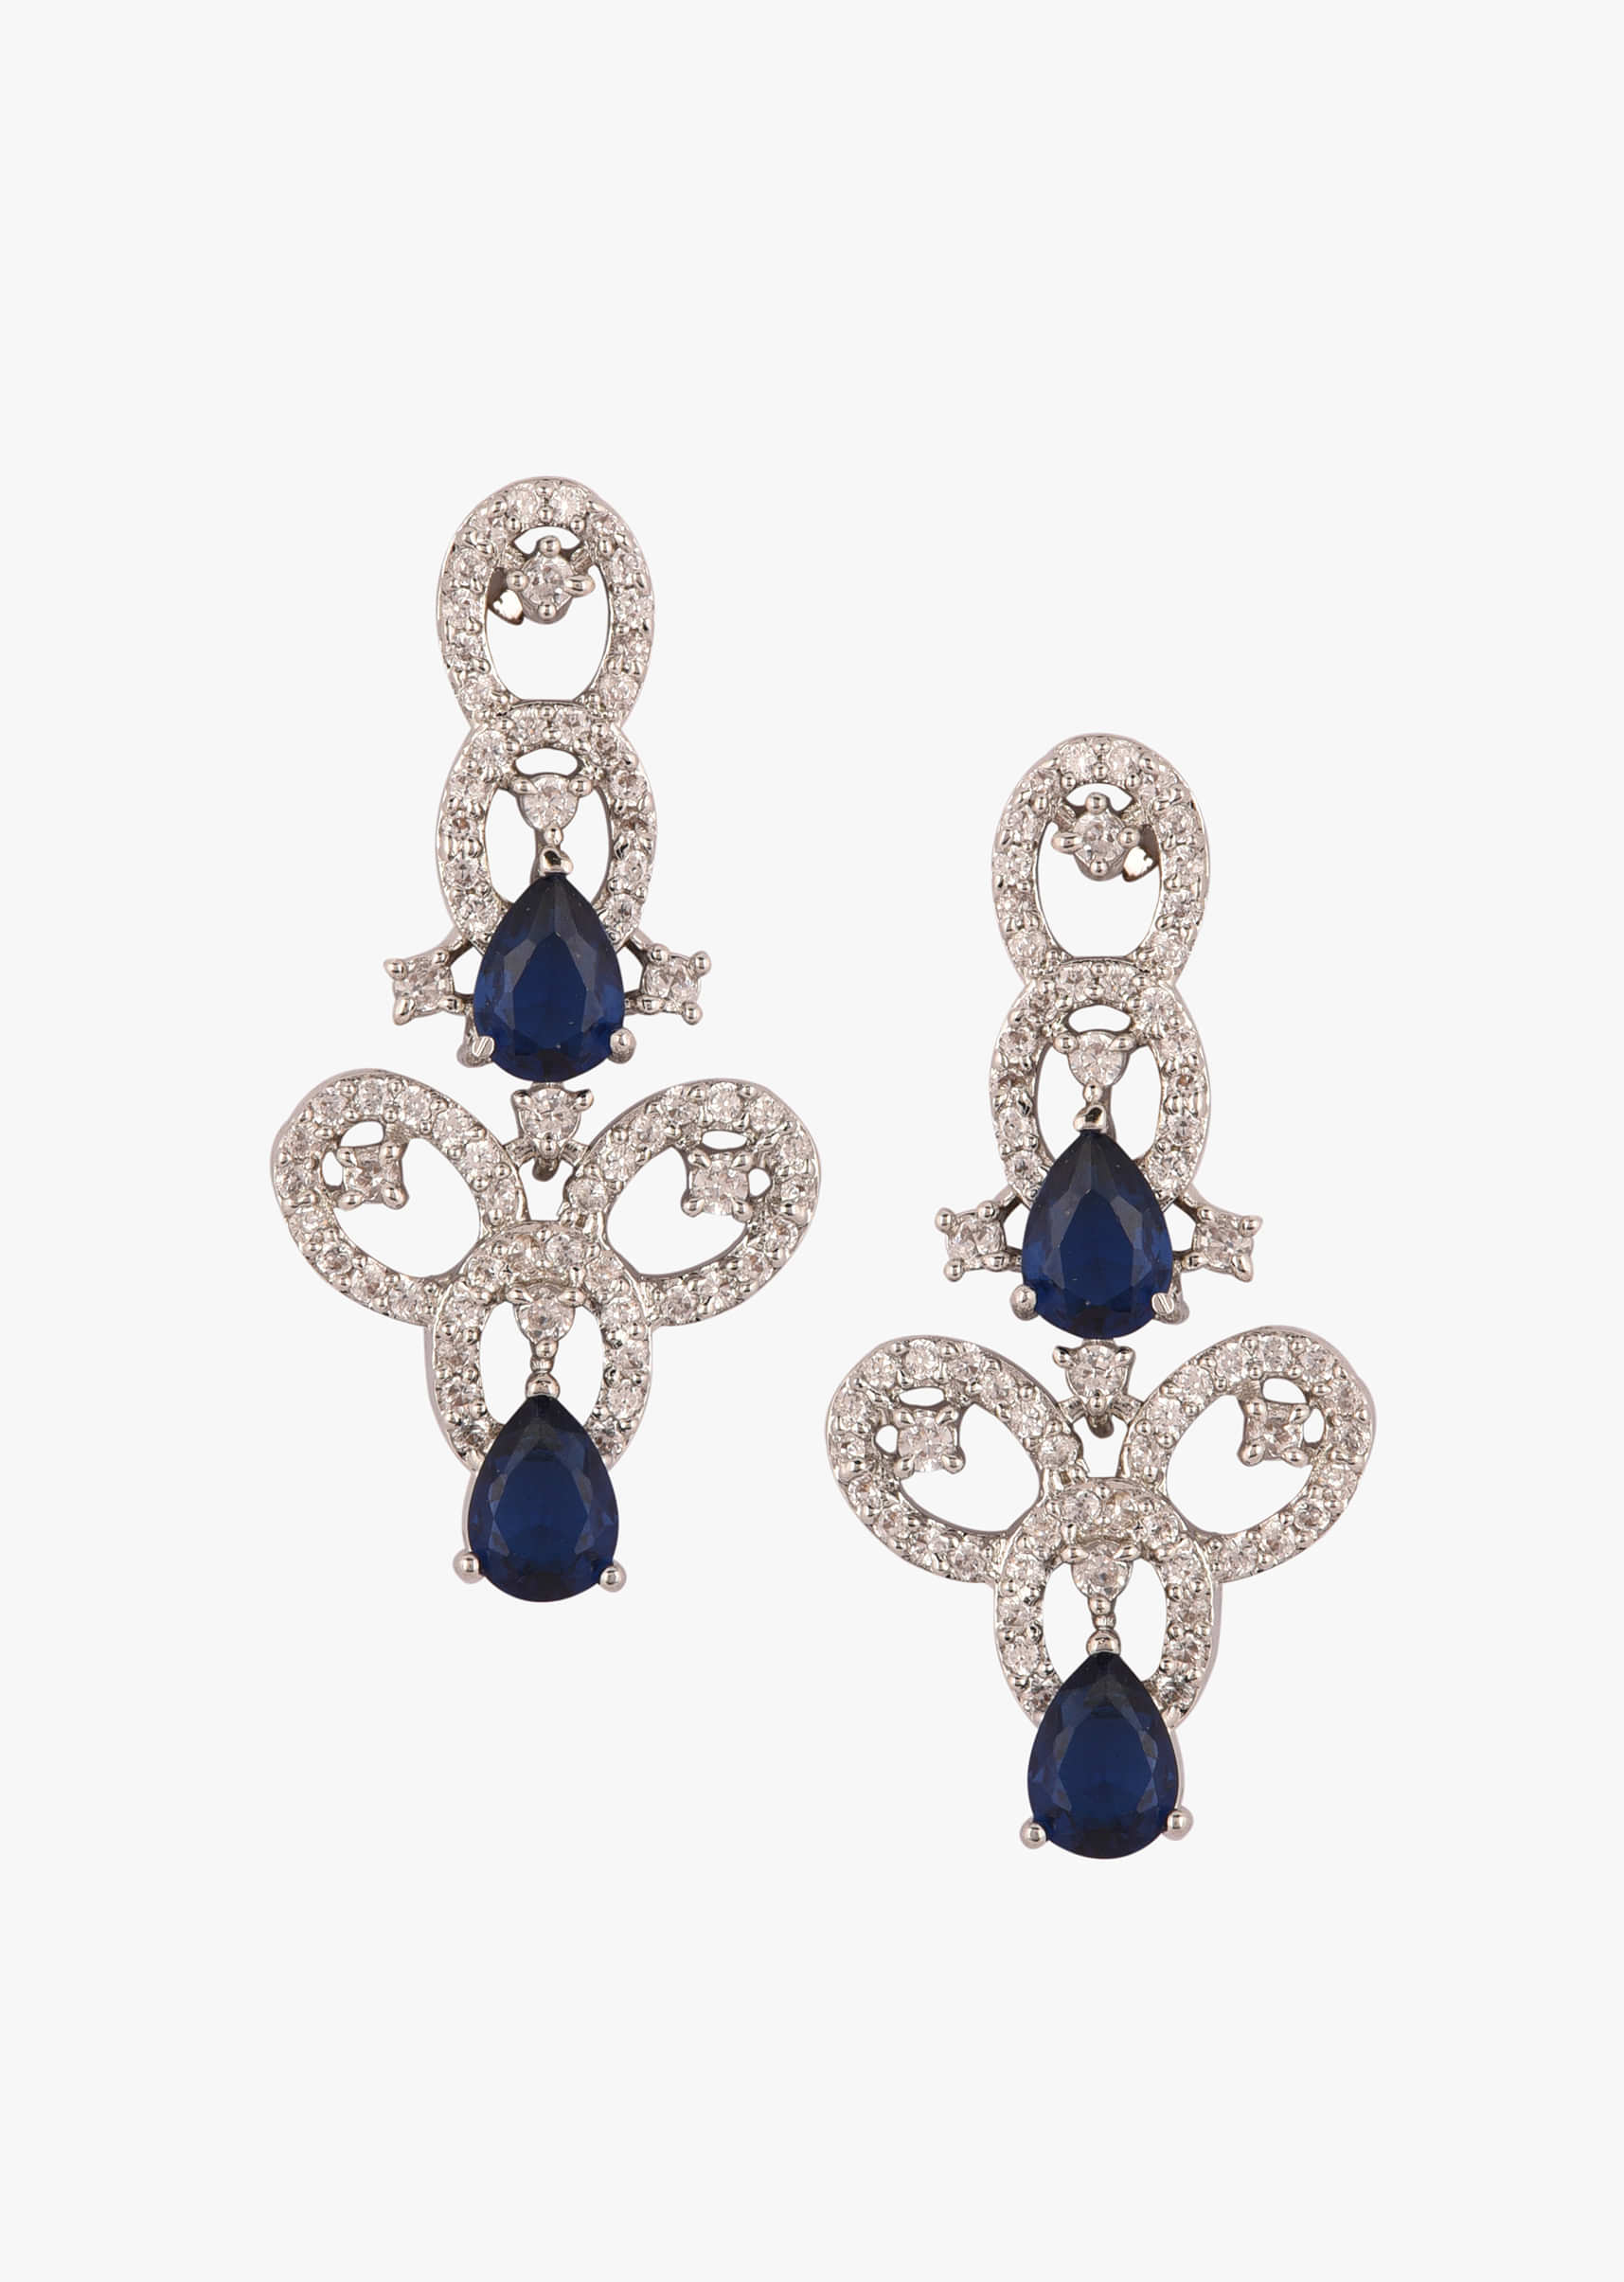 Diamond Necklace Set In Silver Plating With Navy Blue Stones